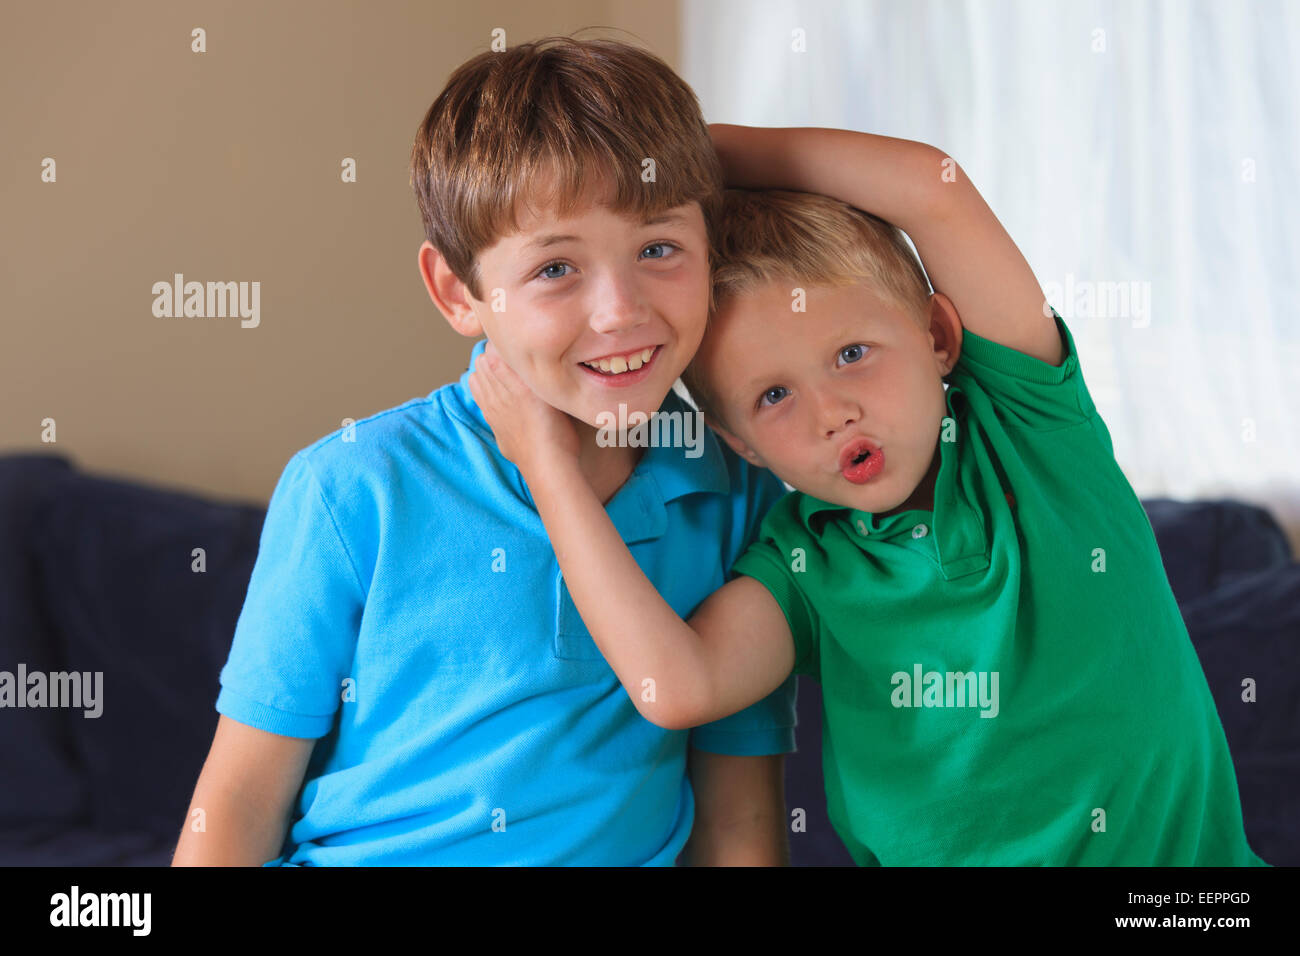 Boys with hearing impairments playing on their couch Stock Photo